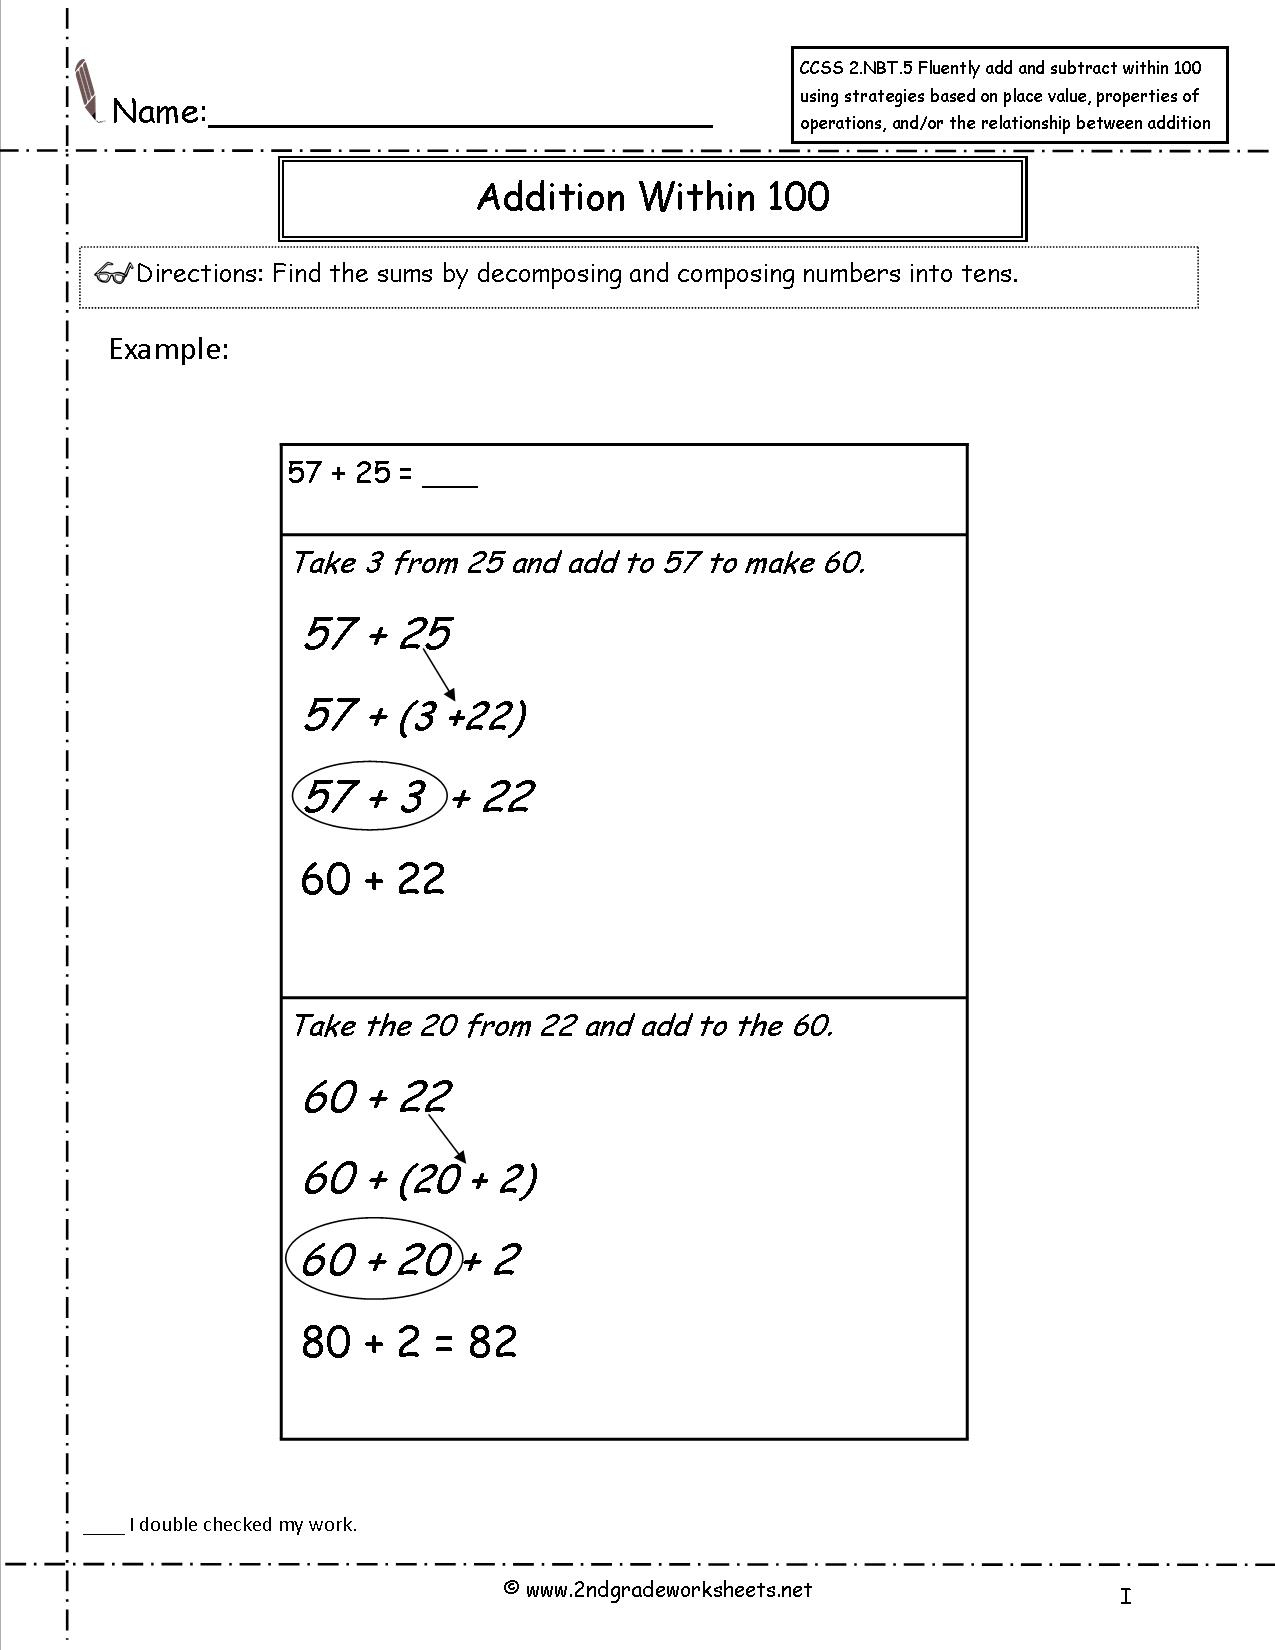 Worksheet. Common Core Math Worksheets. Worksheet Fun Worksheet - Free Printable Common Core Math Worksheets For Third Grade